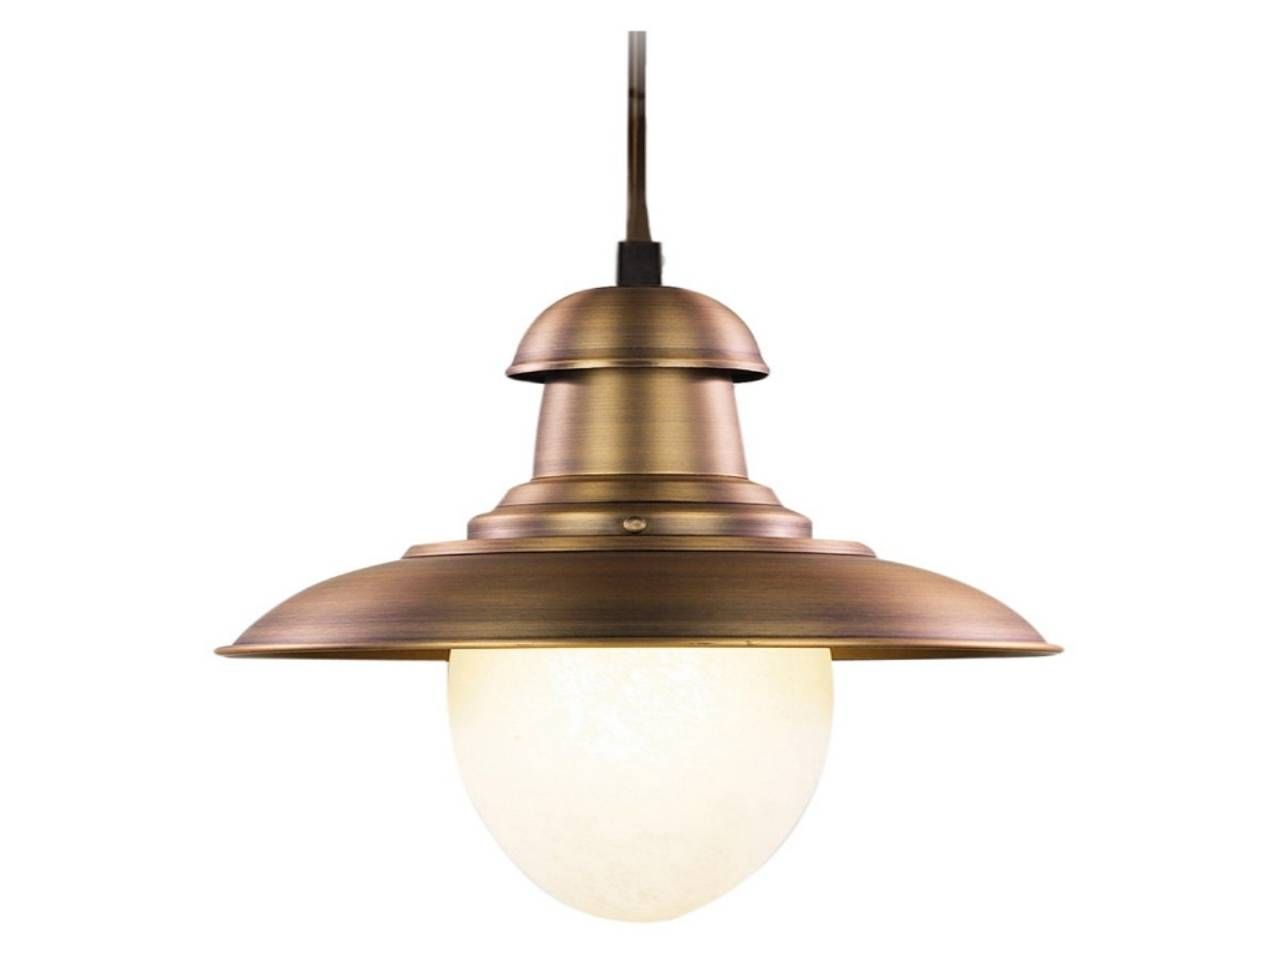 Modern Rustic Lighting, Rustic Ceiling Light Fixtures Railroad Pertaining To Railroad Pendant Lights (View 5 of 15)